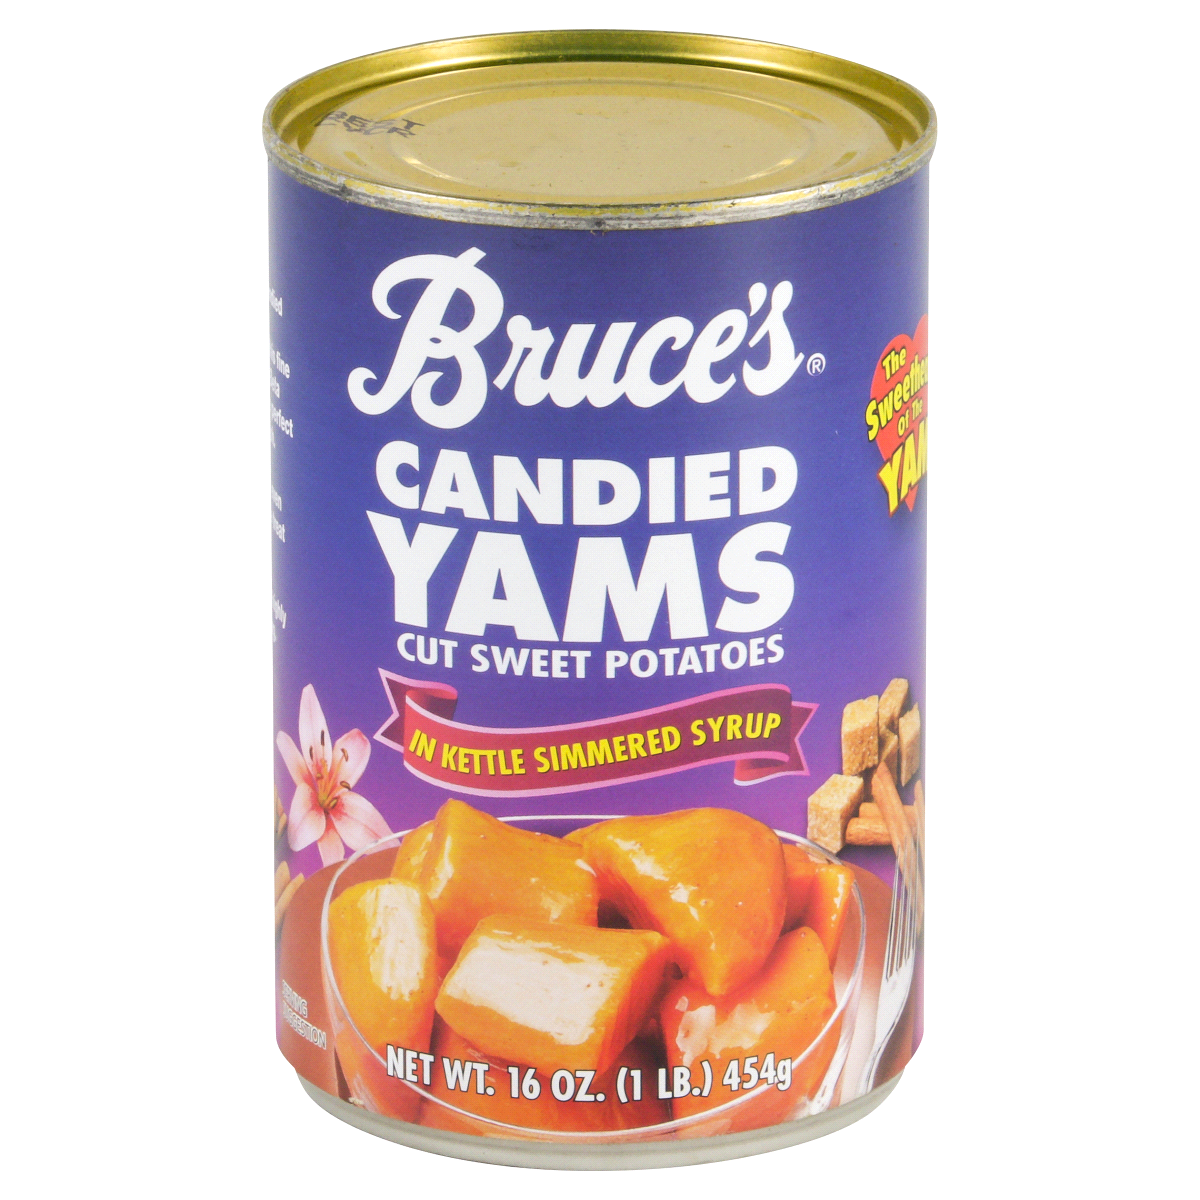 slide 1 of 4, Bruce's Cut Sweet Potatoes Candied Yams In Kettle Simmered Syrup, 16 oz